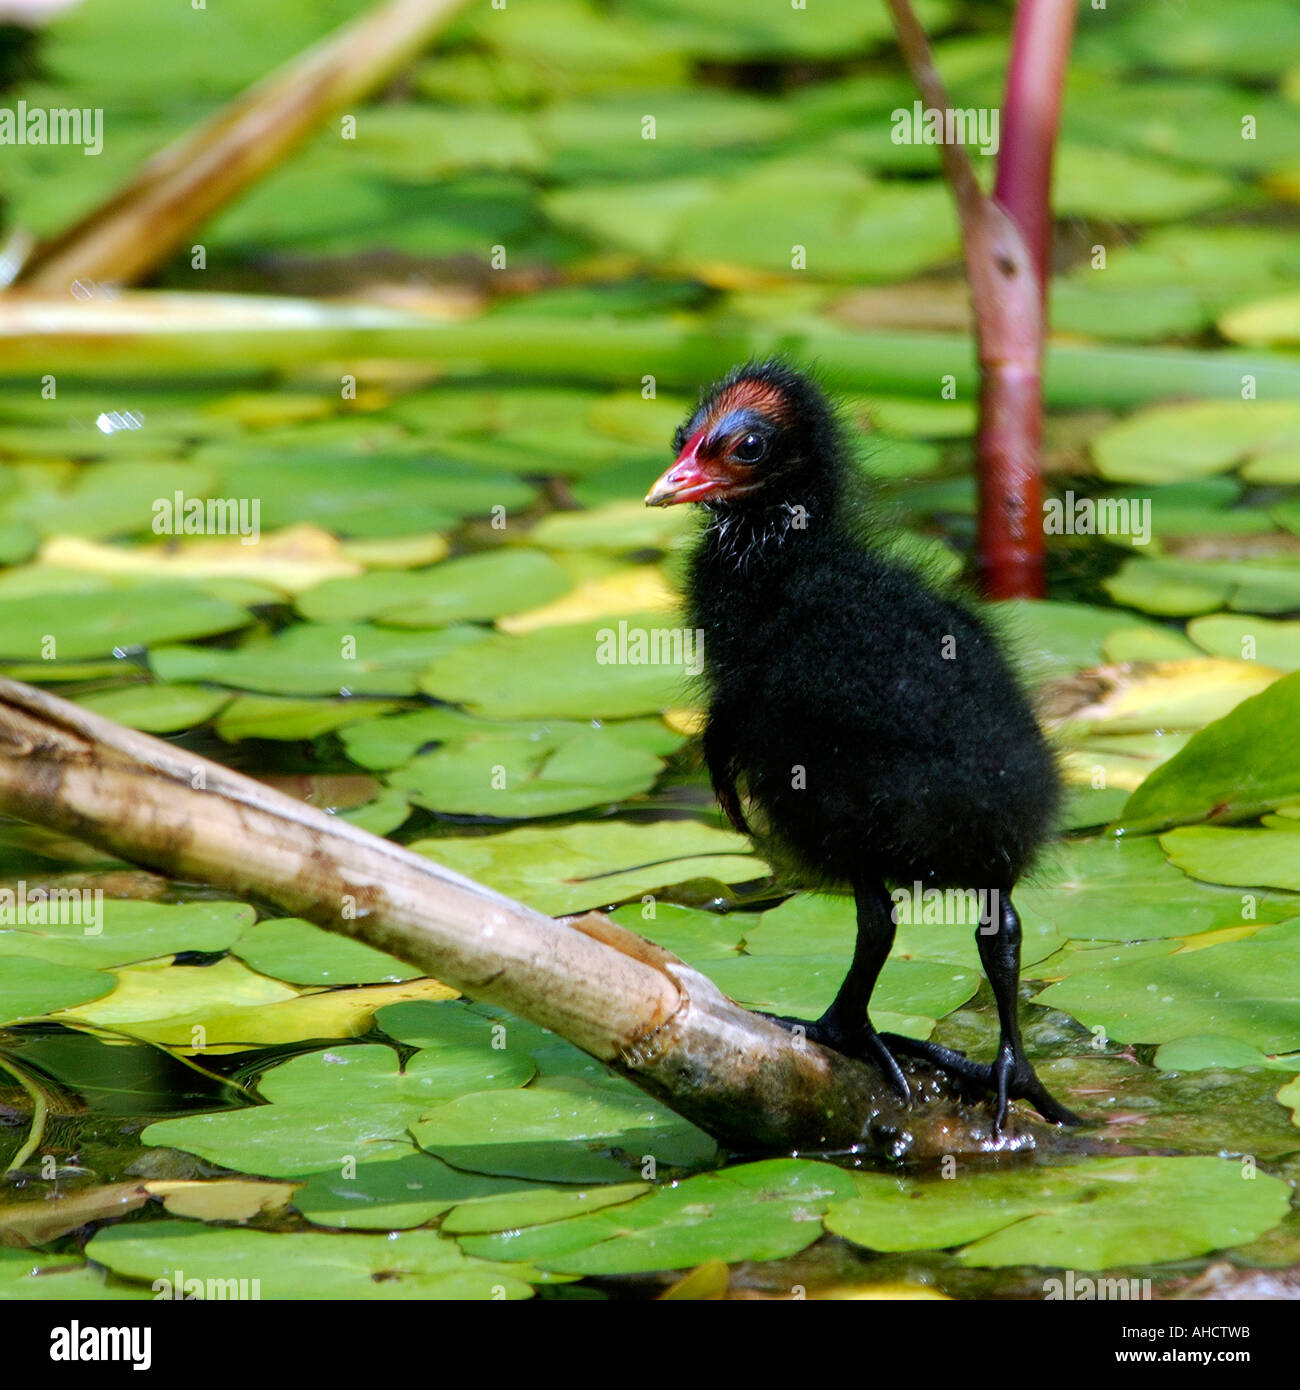 Square format image of baby Moorhen chick Gallinula chloropus standing on a twig amongst water lillies looking at camera Stock Photo